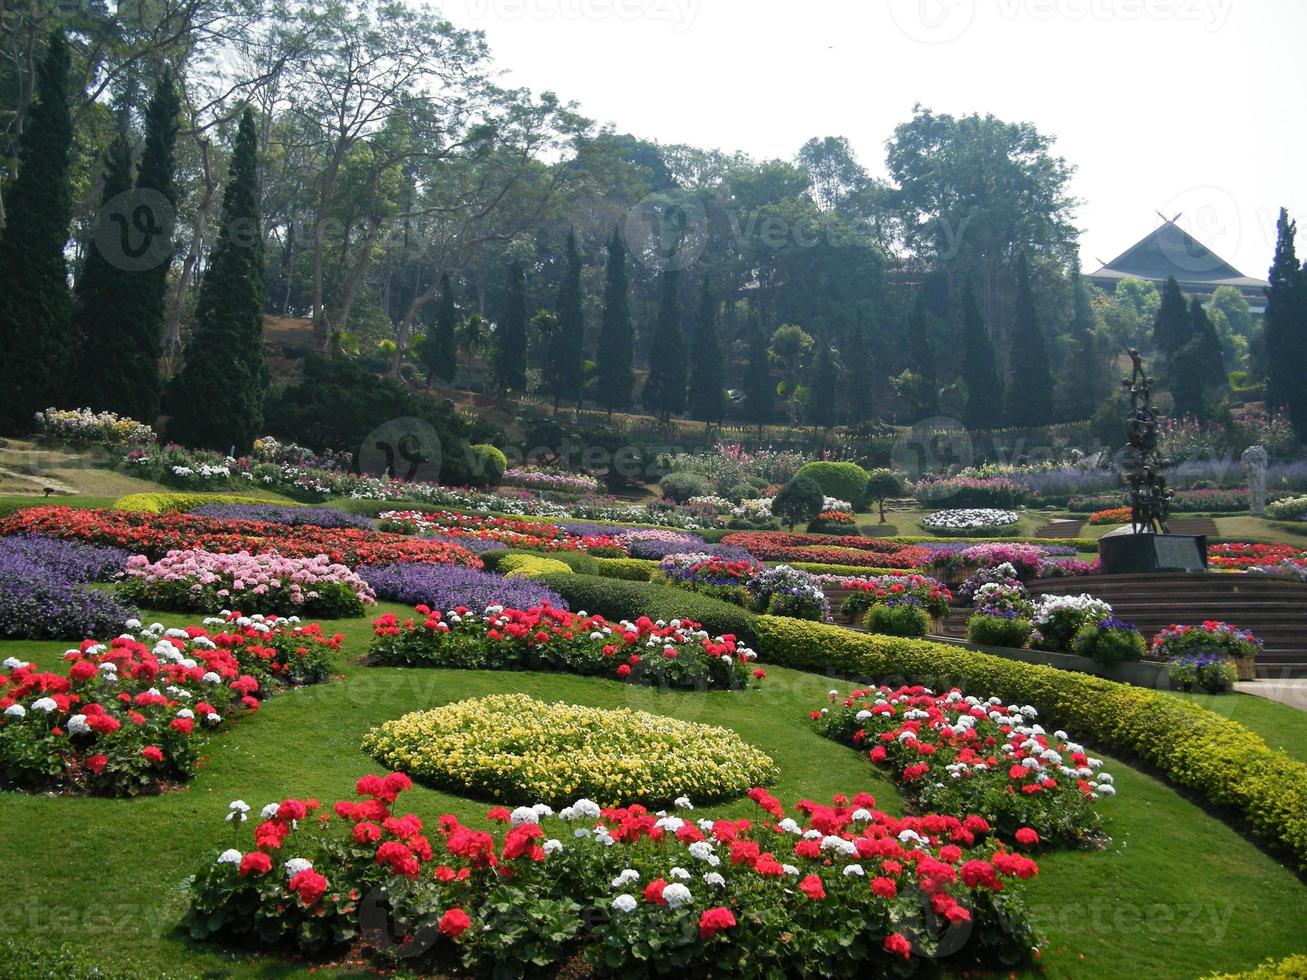 Flowers in Indias Botanical Garden, colorful and beautiful photo